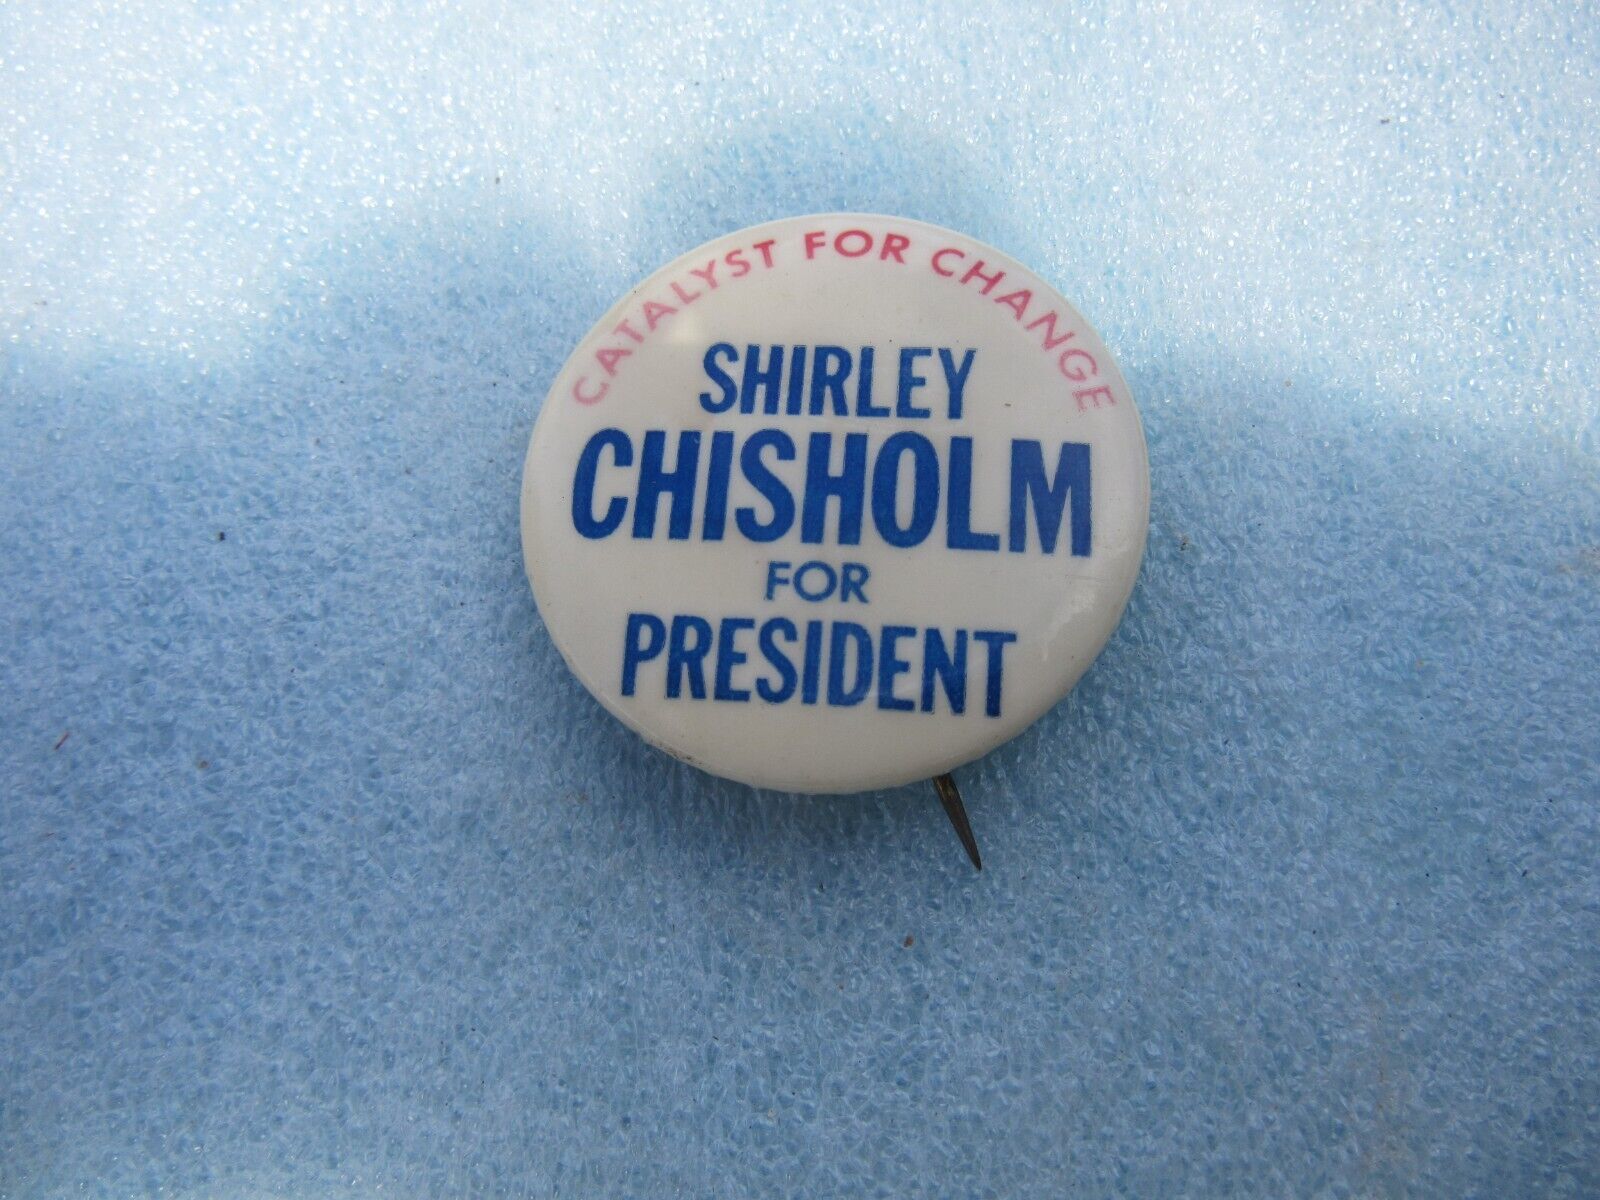 Original 1972 SHIRLEY CHISHOLM Presidential Campaign Button: Catalyst For Change